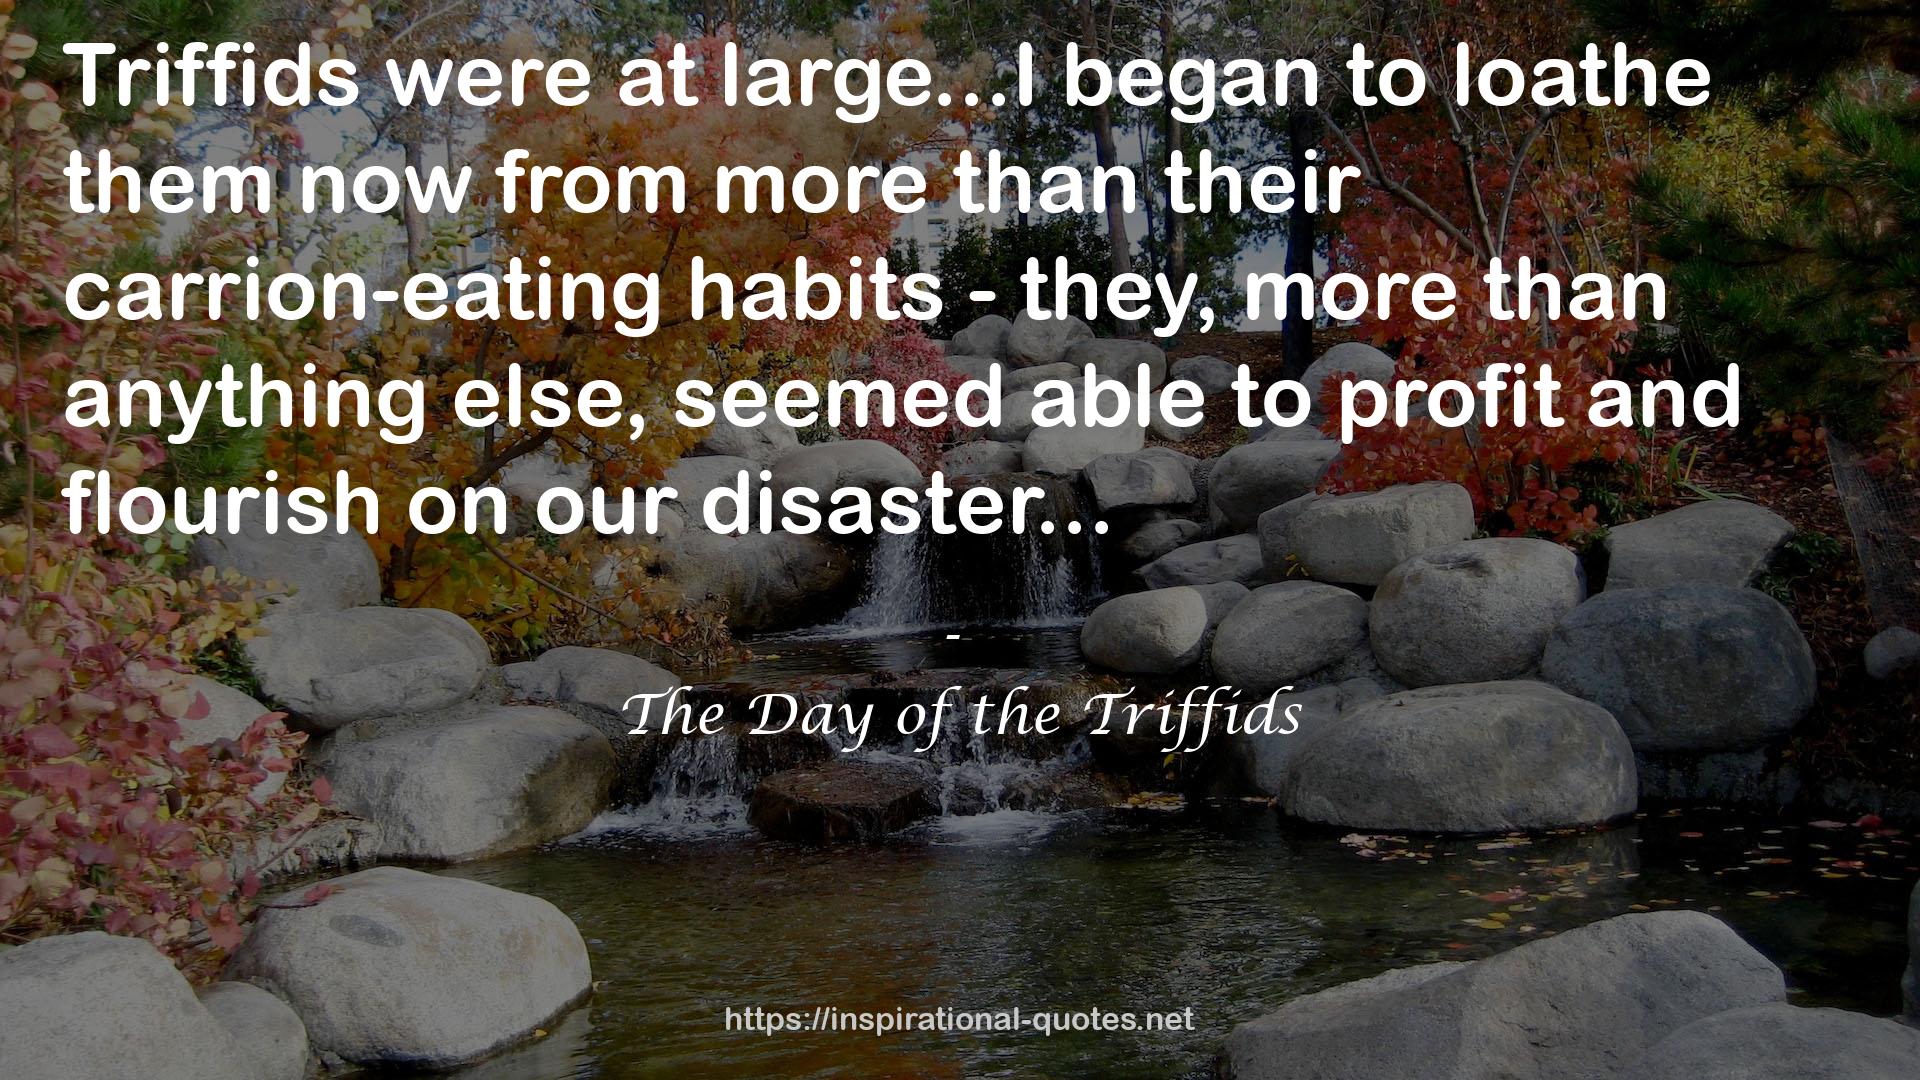 The Day of the Triffids QUOTES